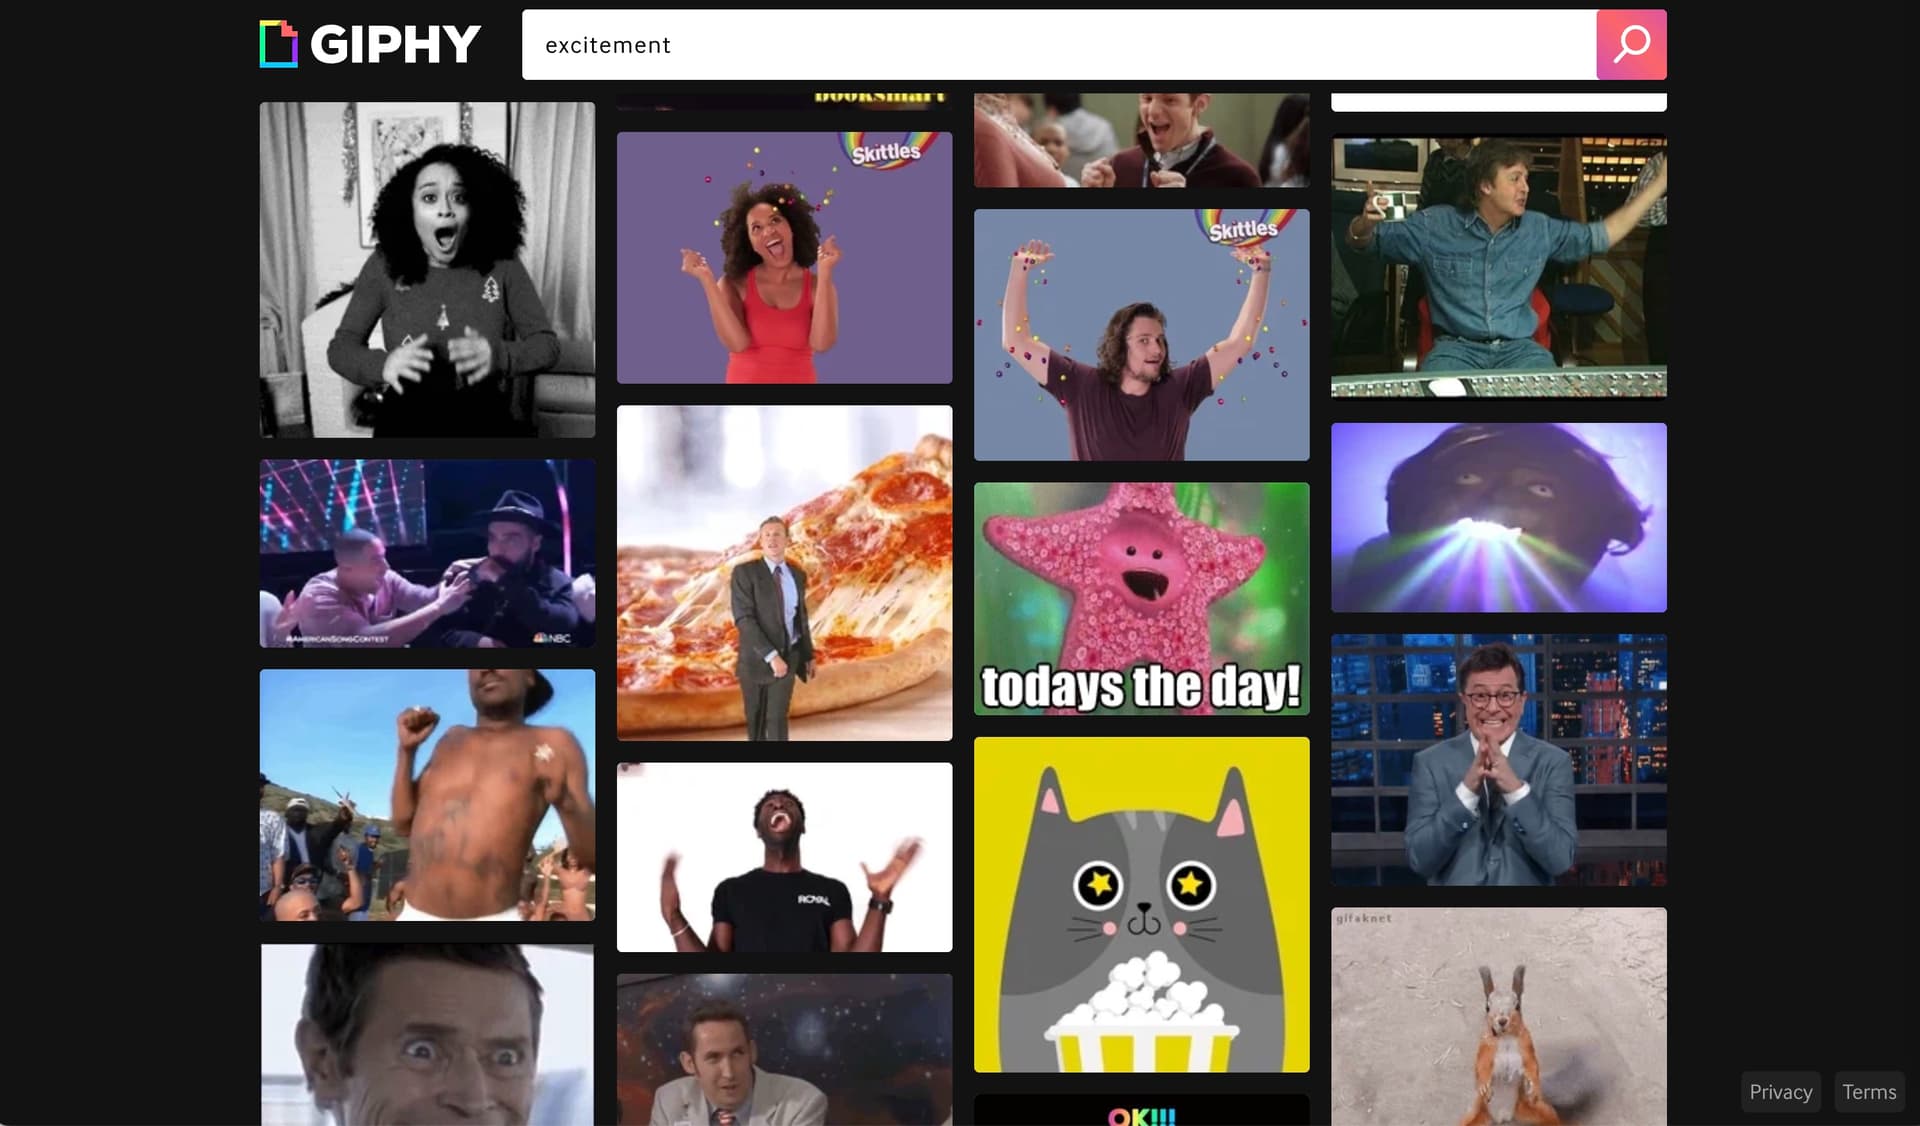 Screen full of Giphy GIFs from a search on excitement